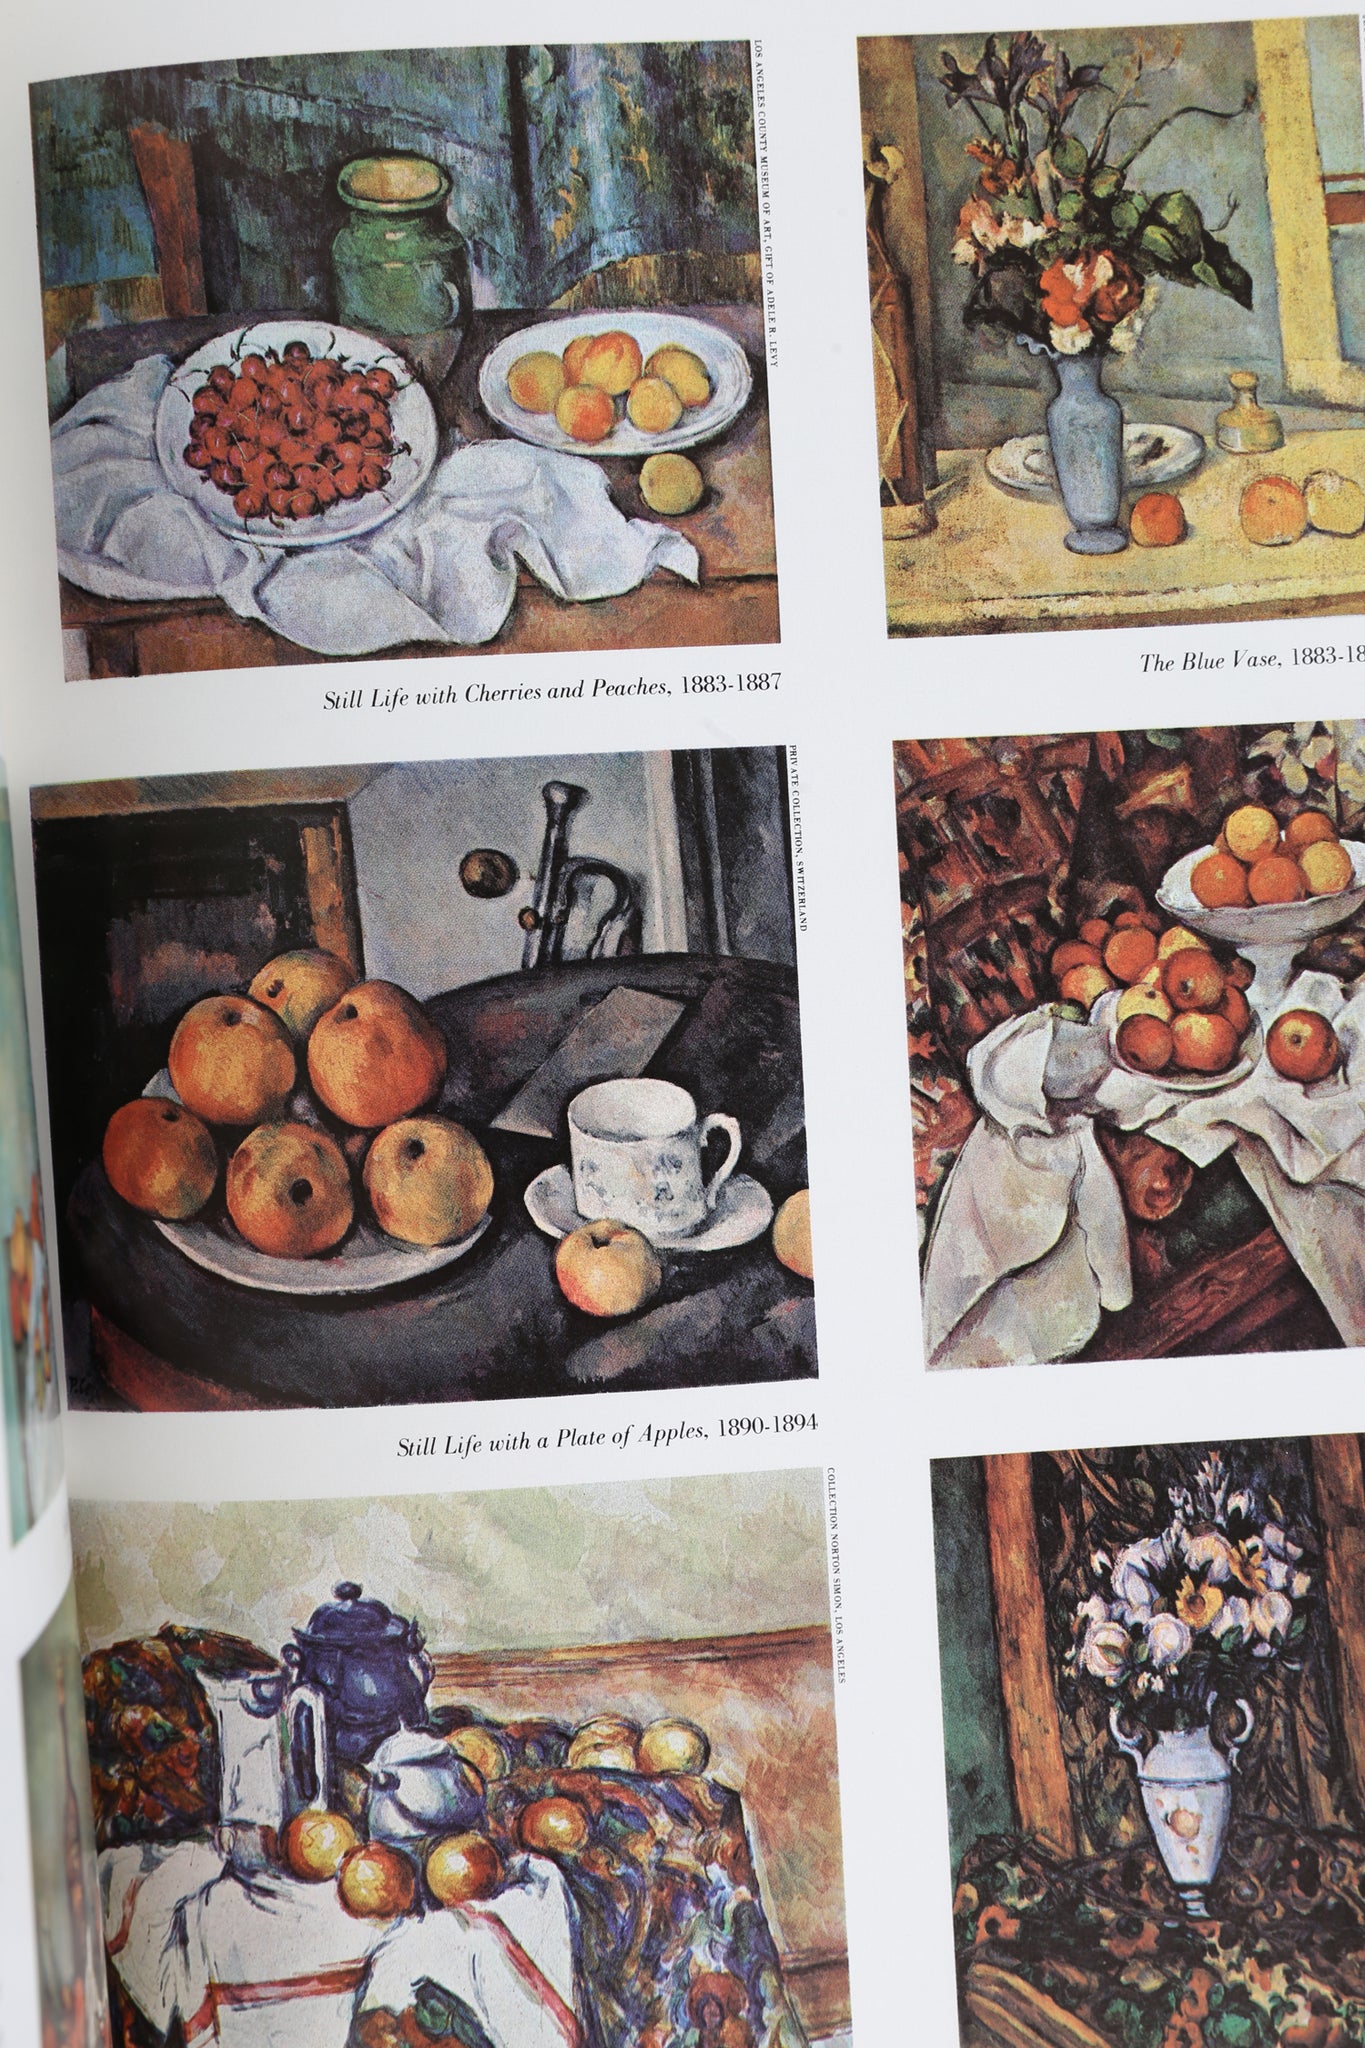 The World of Cézanne Book